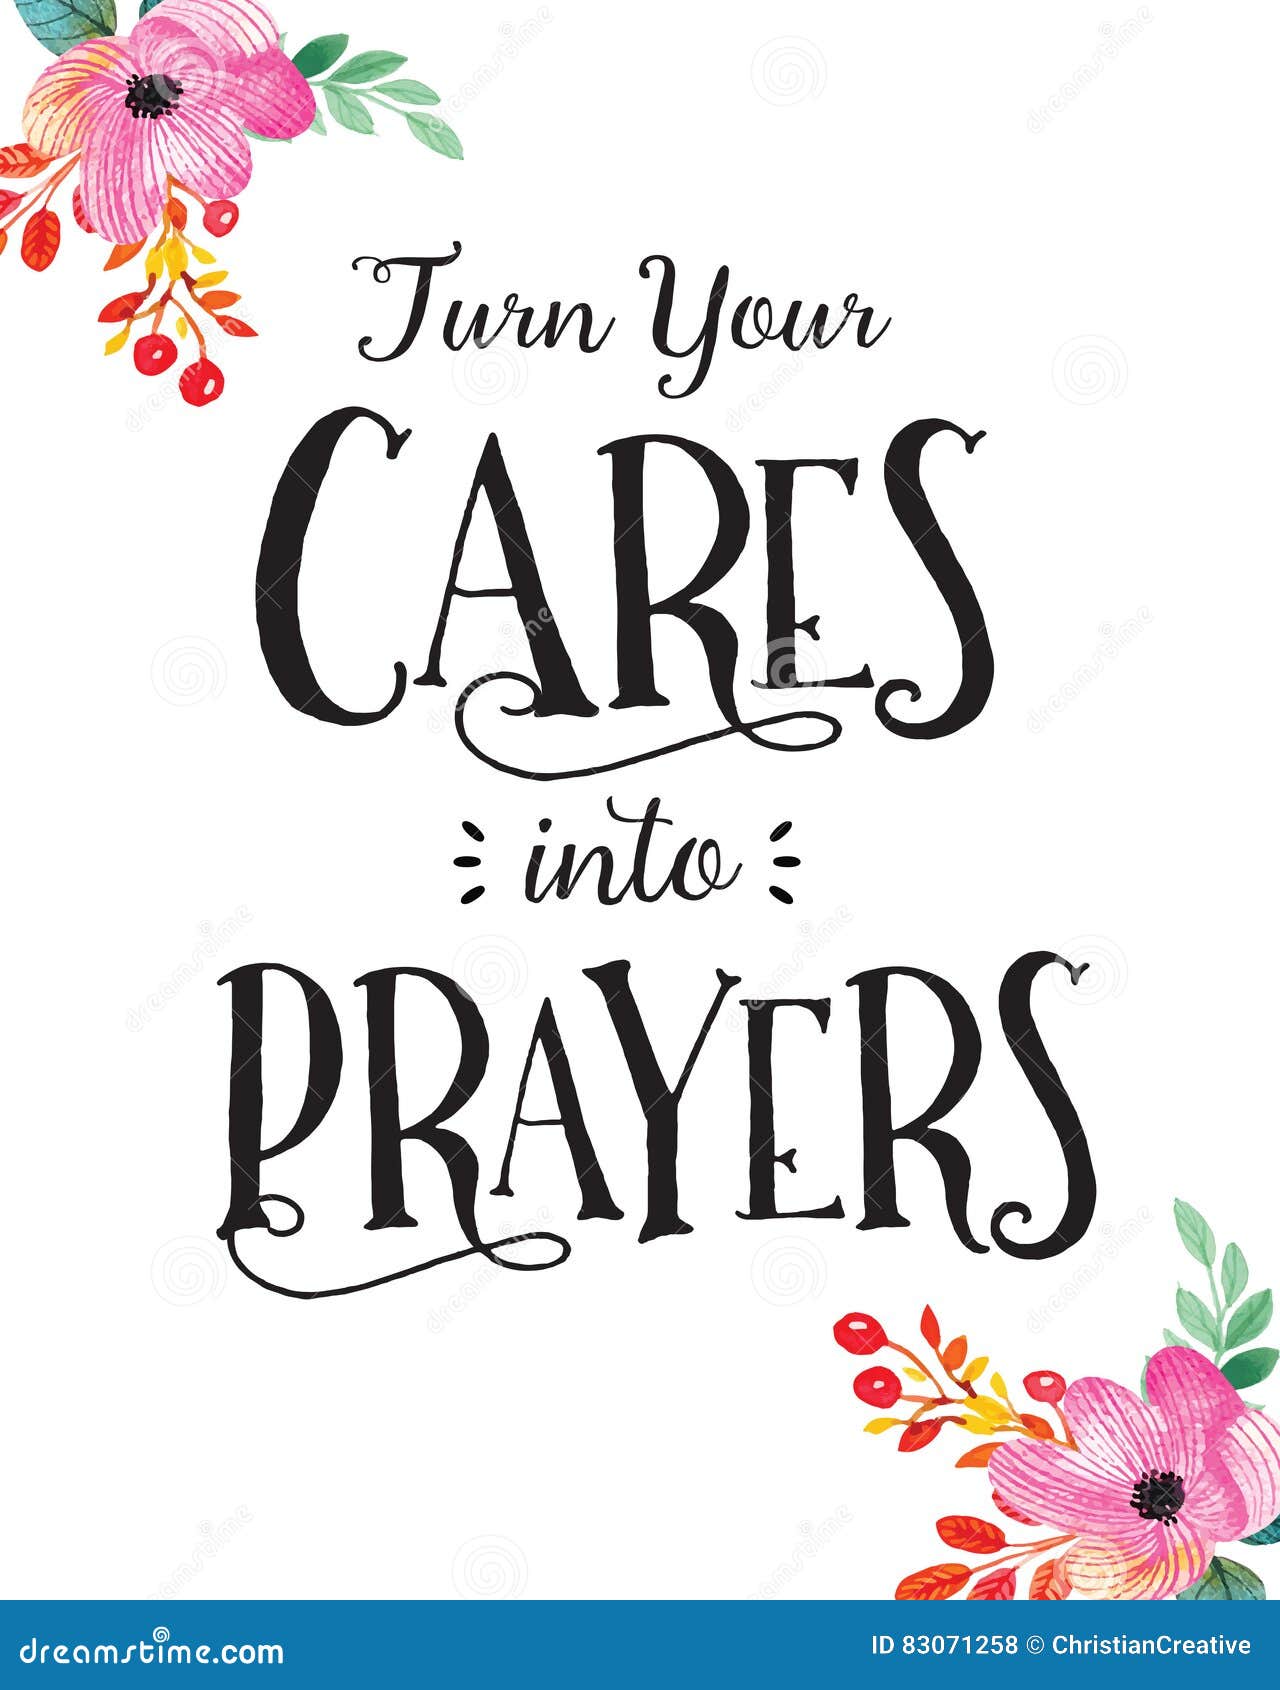 turn your cares into prayers